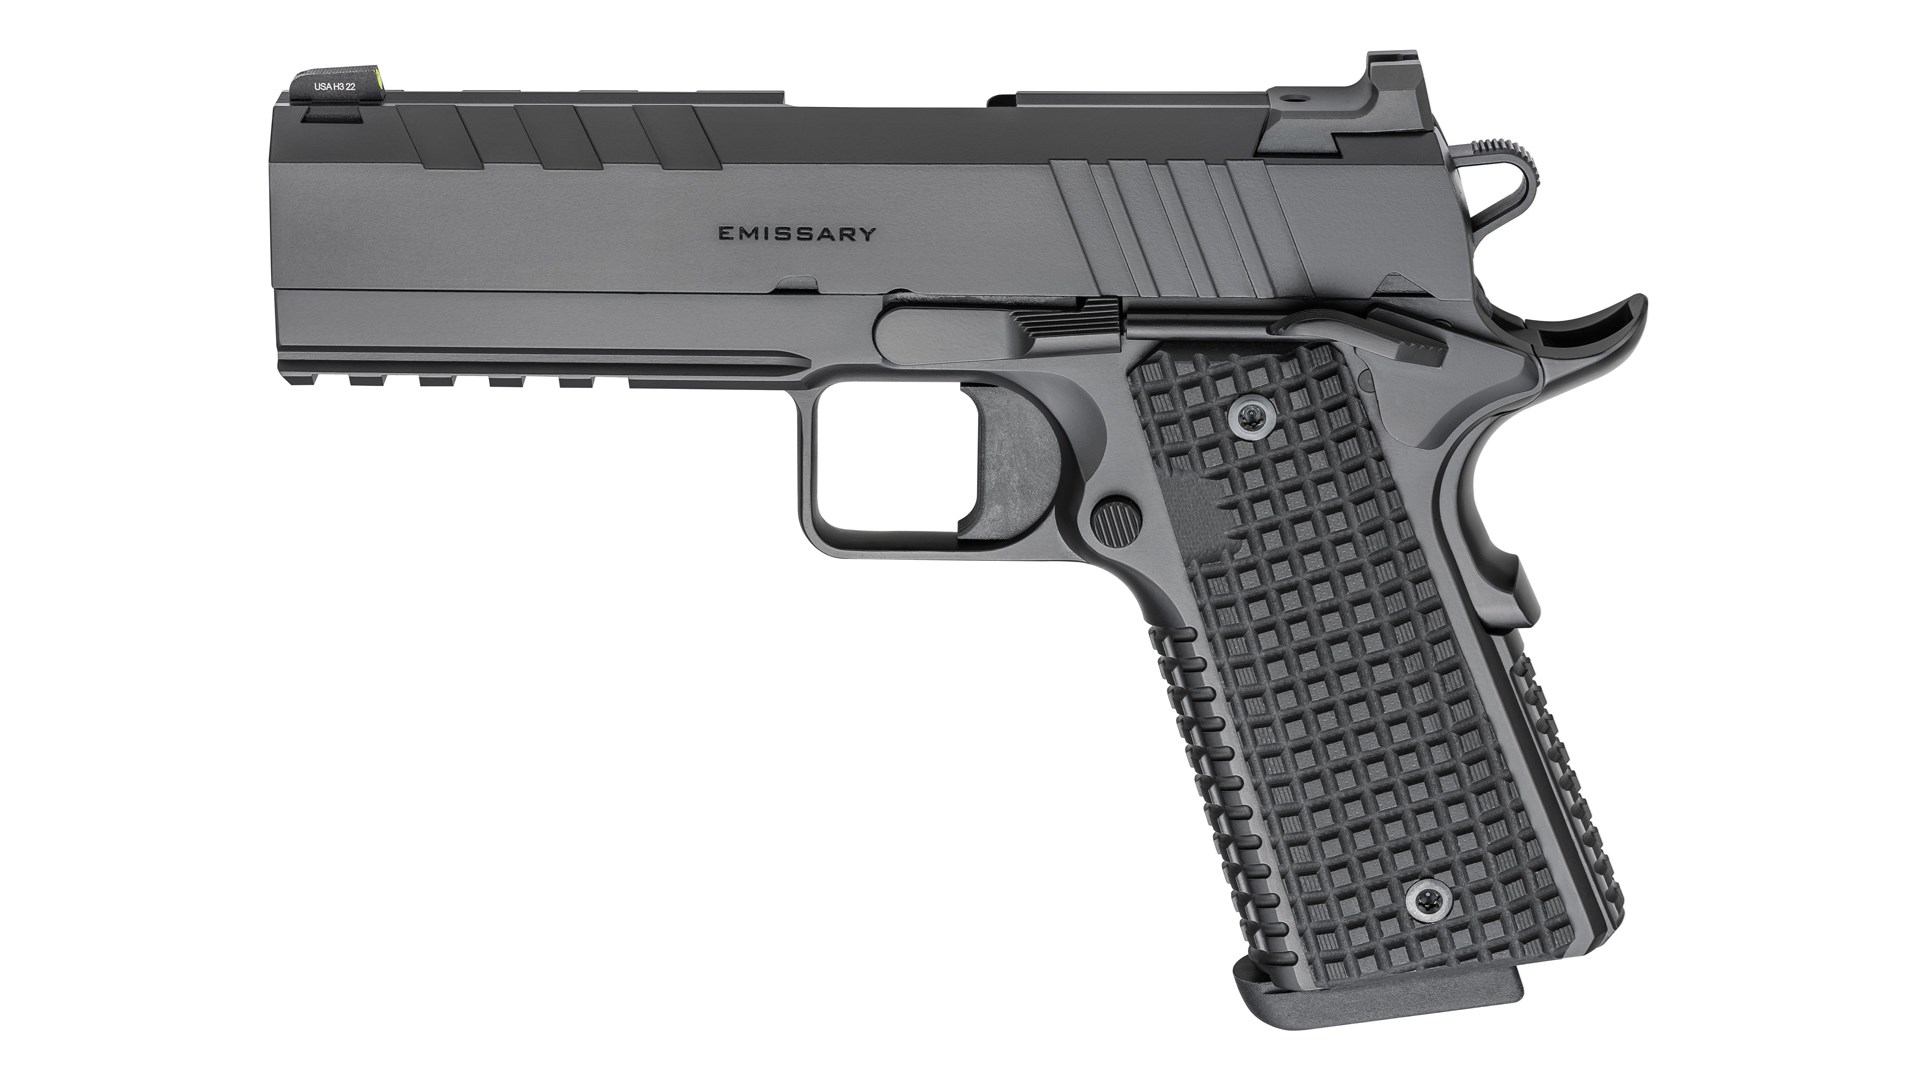 Right side of the 4.25-inch Springfield Armory Emissary M1911 pistol.